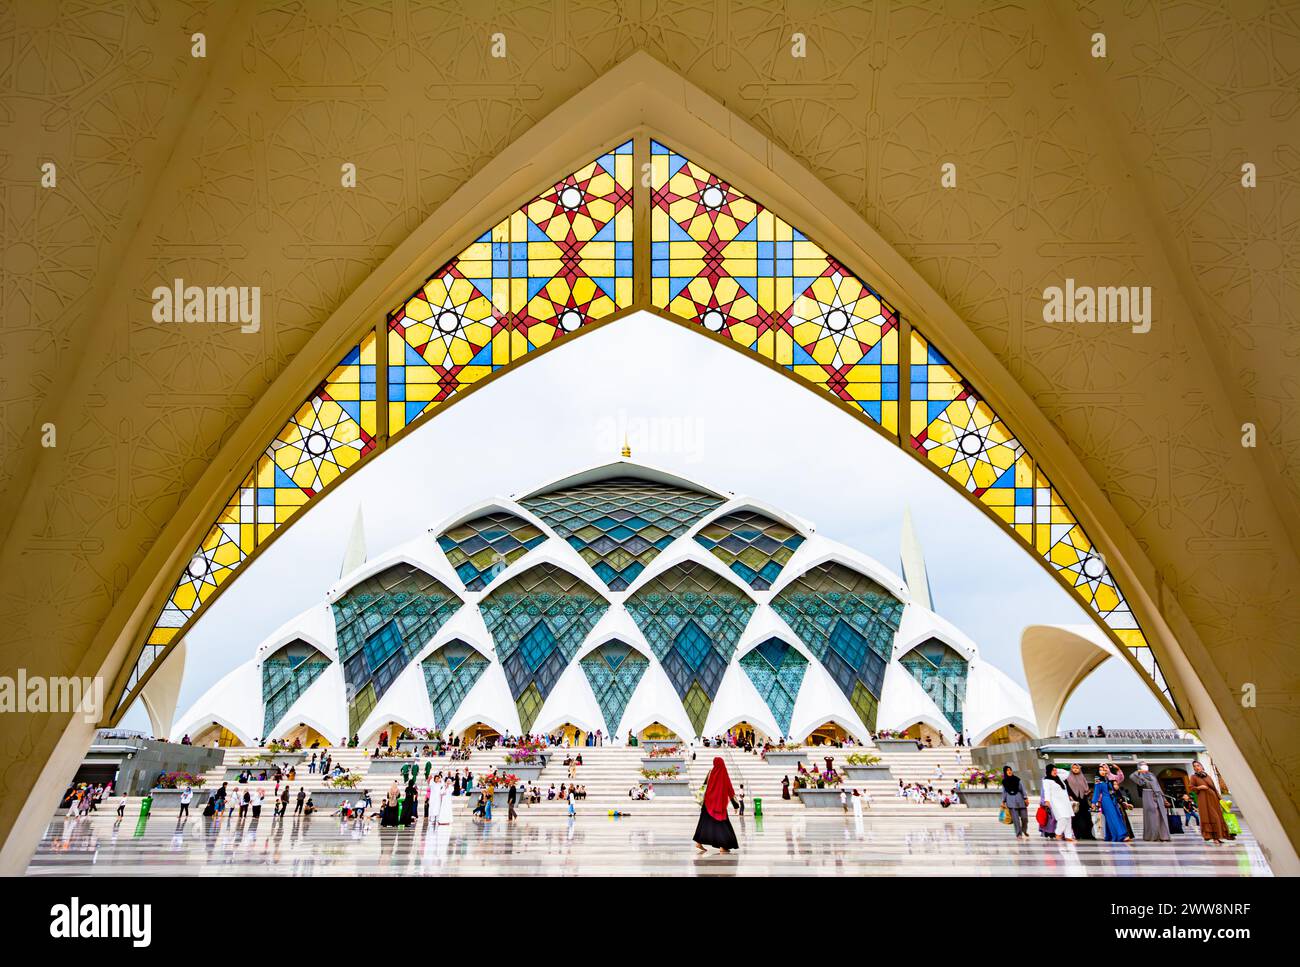 Bandung, Indonesia - 4th Nov 2023: The arch in Al Jabbar Great Mosque, with a lot of worshippers Stock Photo